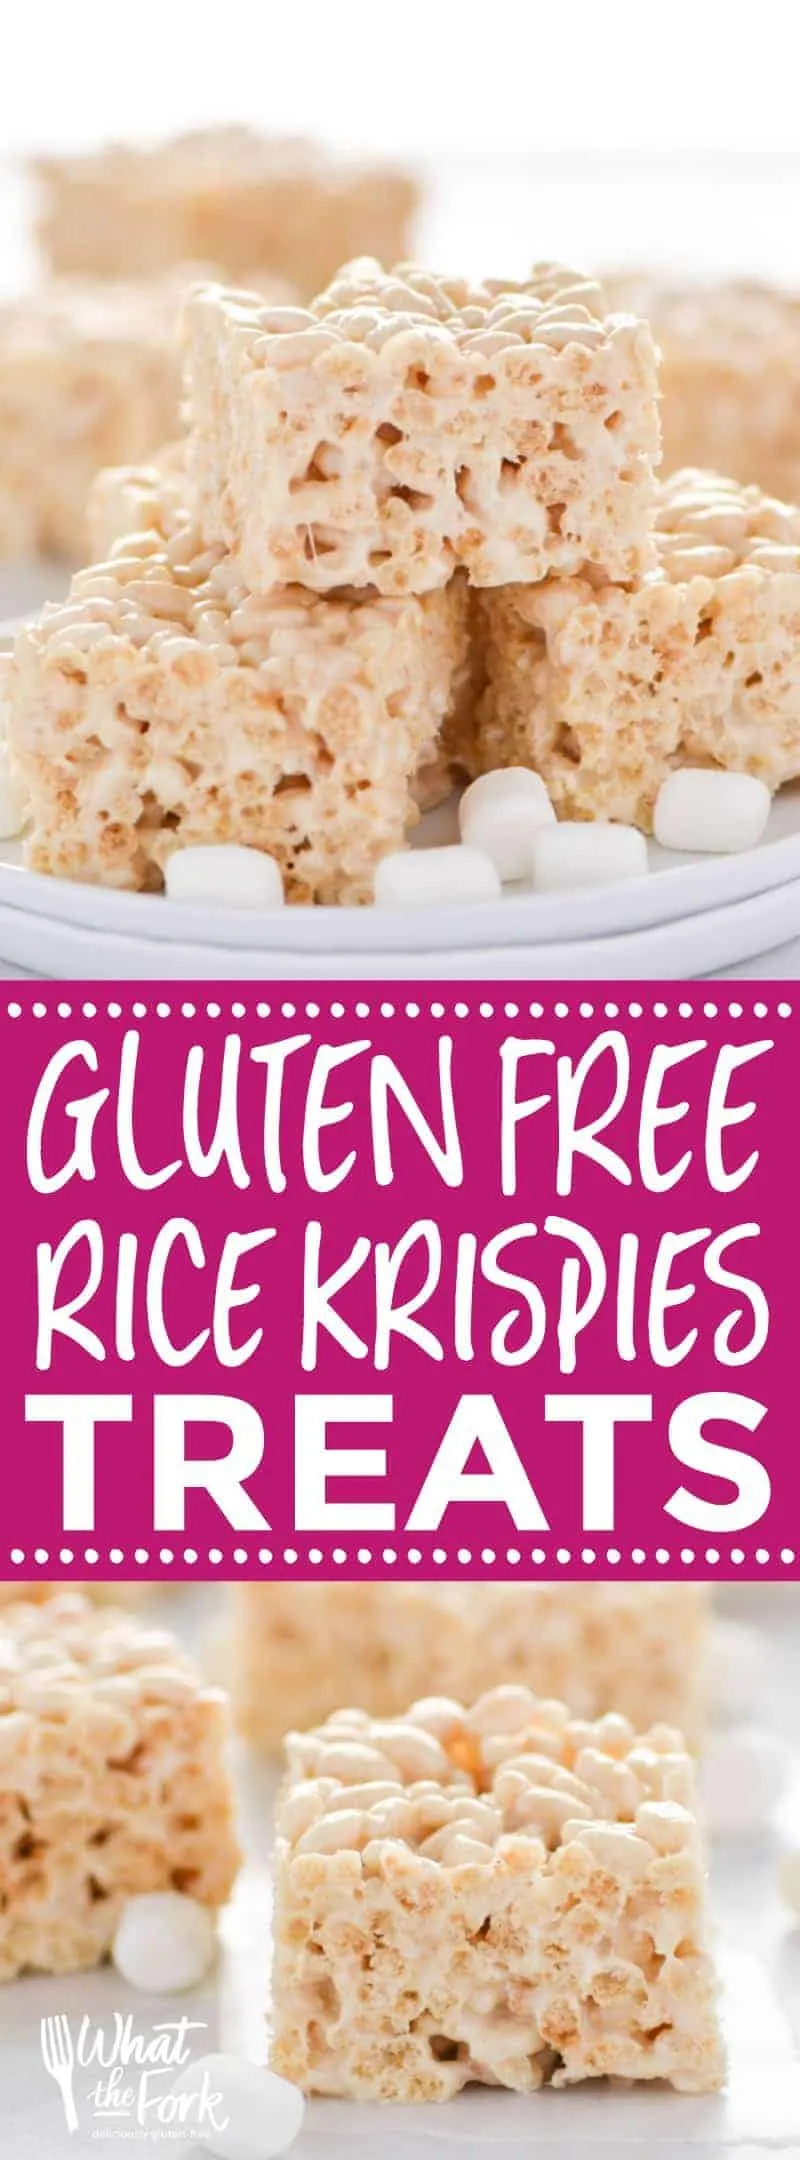 Classic Gluten Free Rice Krispies Treats - these are a crowd-pleasing favorite! They're so easy to make and have such a great gooey marshmallow to cereal ratio - they're simply addicting! Dessert recipe from @whattheforkblog | whattheforkfoodblog.com | gluten free desserts | no-bake dessert recipes | how to make rice krispie treats | gluten free no-bake recipes | easy dessert recipes | homemade rice krispies treats | marshmallow recipes | desserts for a bake sale | classic dessert recipes